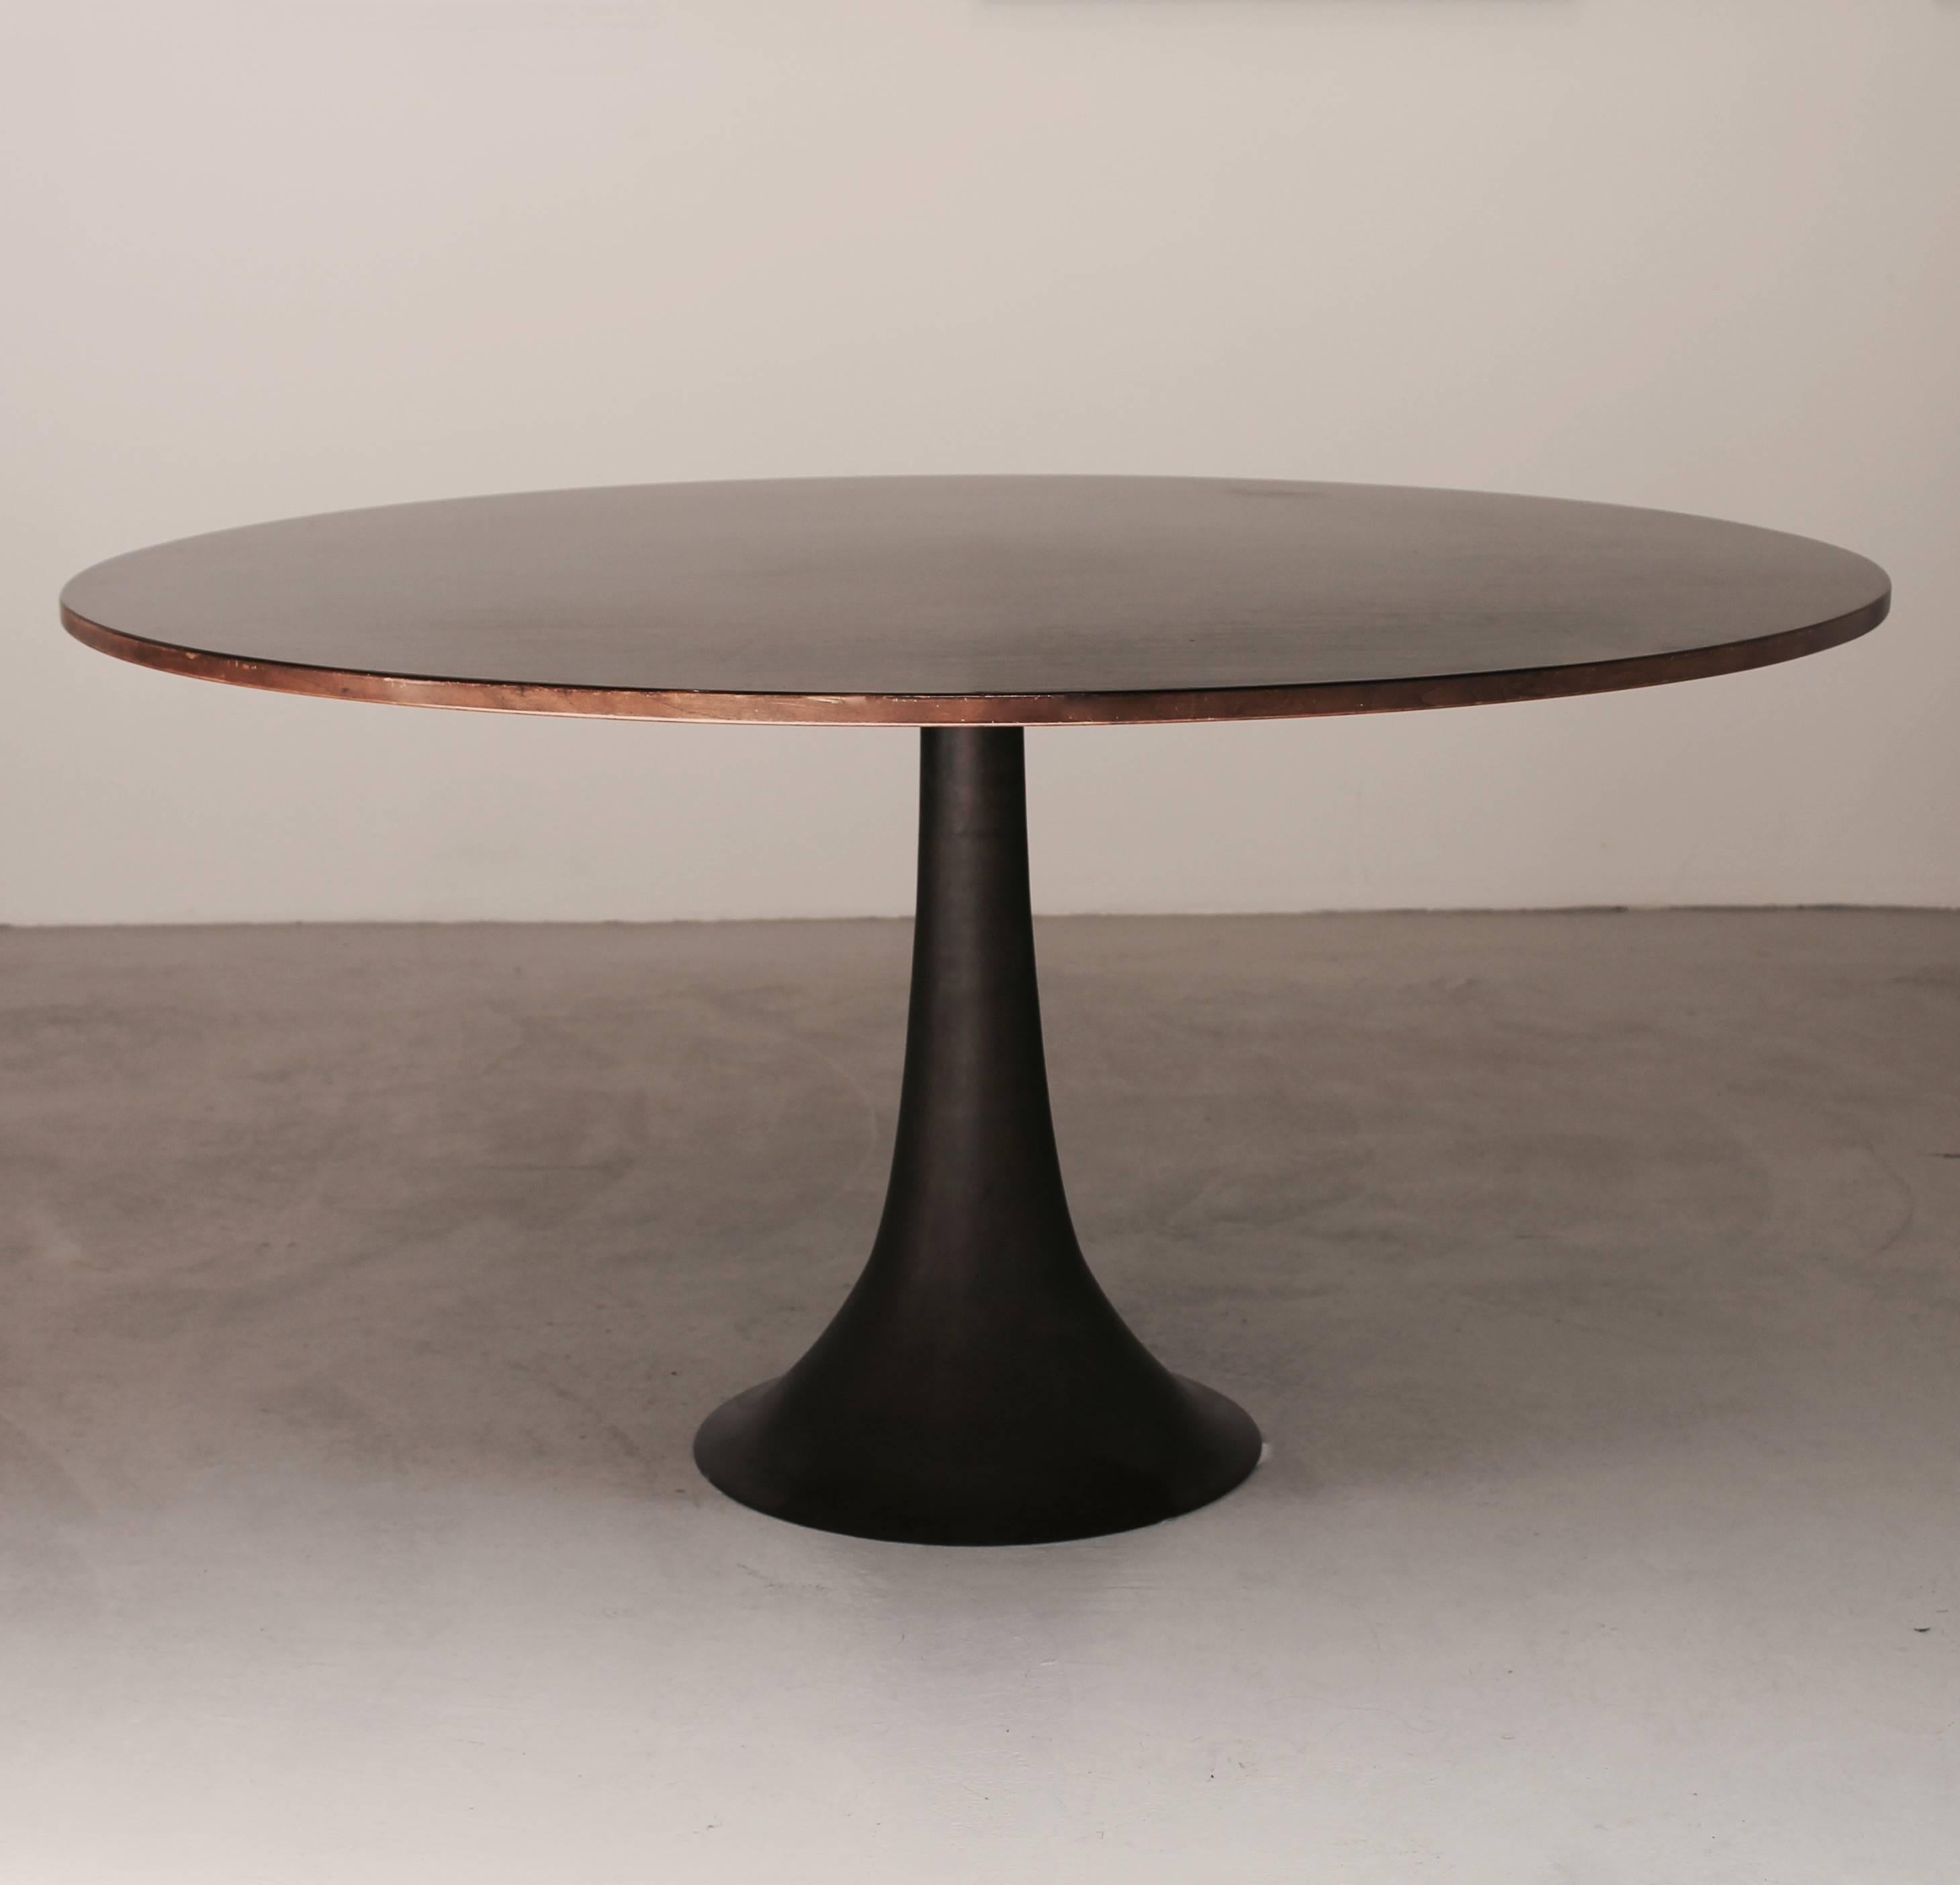 Table designed by Angelo Mangiarotti for Bernini. Foot in bronze realized by Battaglia foundry, wooden top.